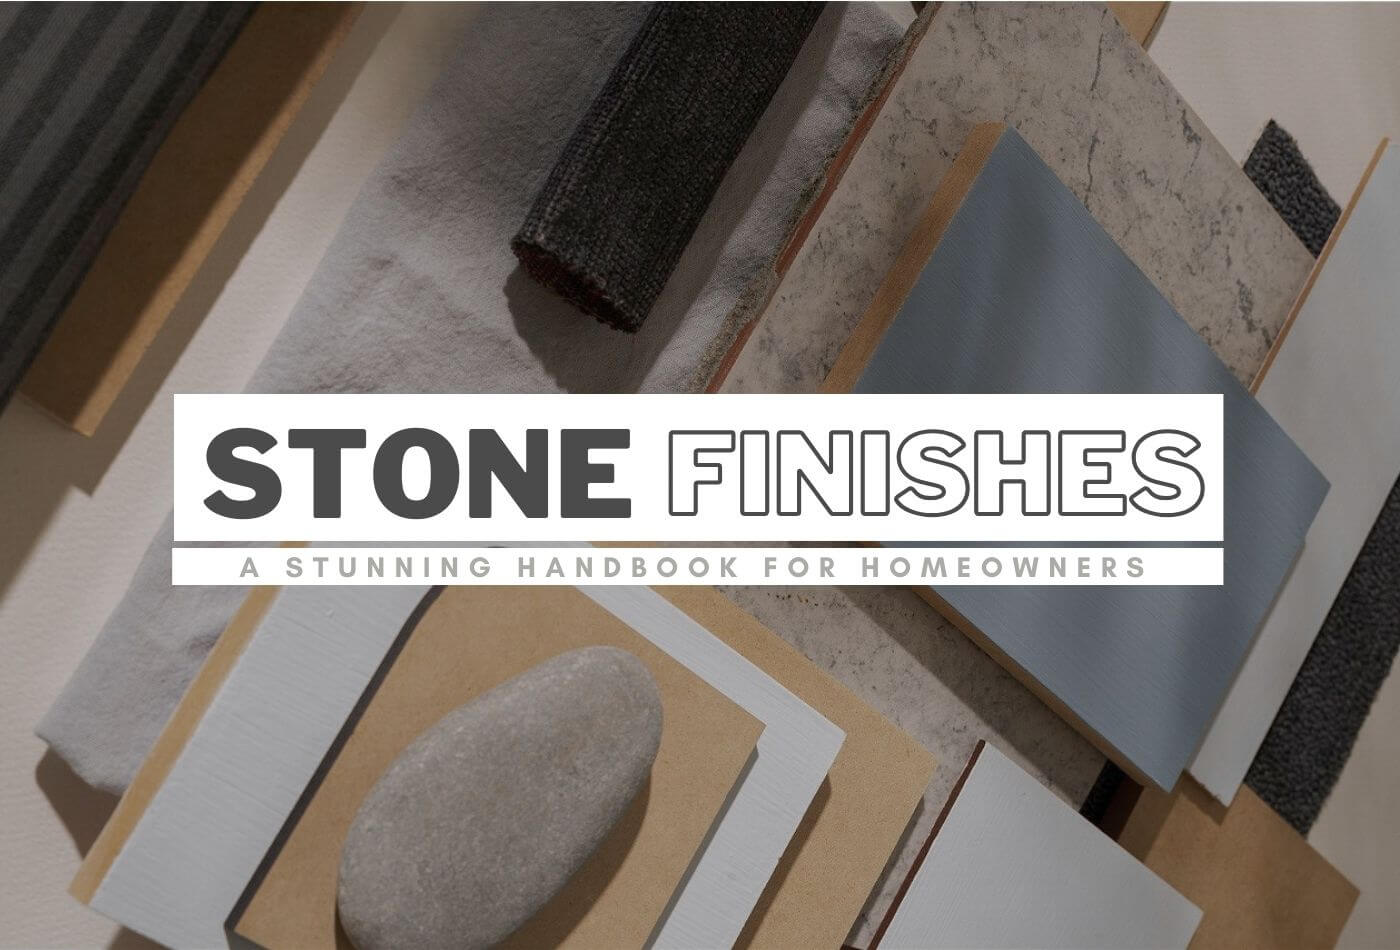 Stone Finishes 101: A Stunning Handbook For Homeowners